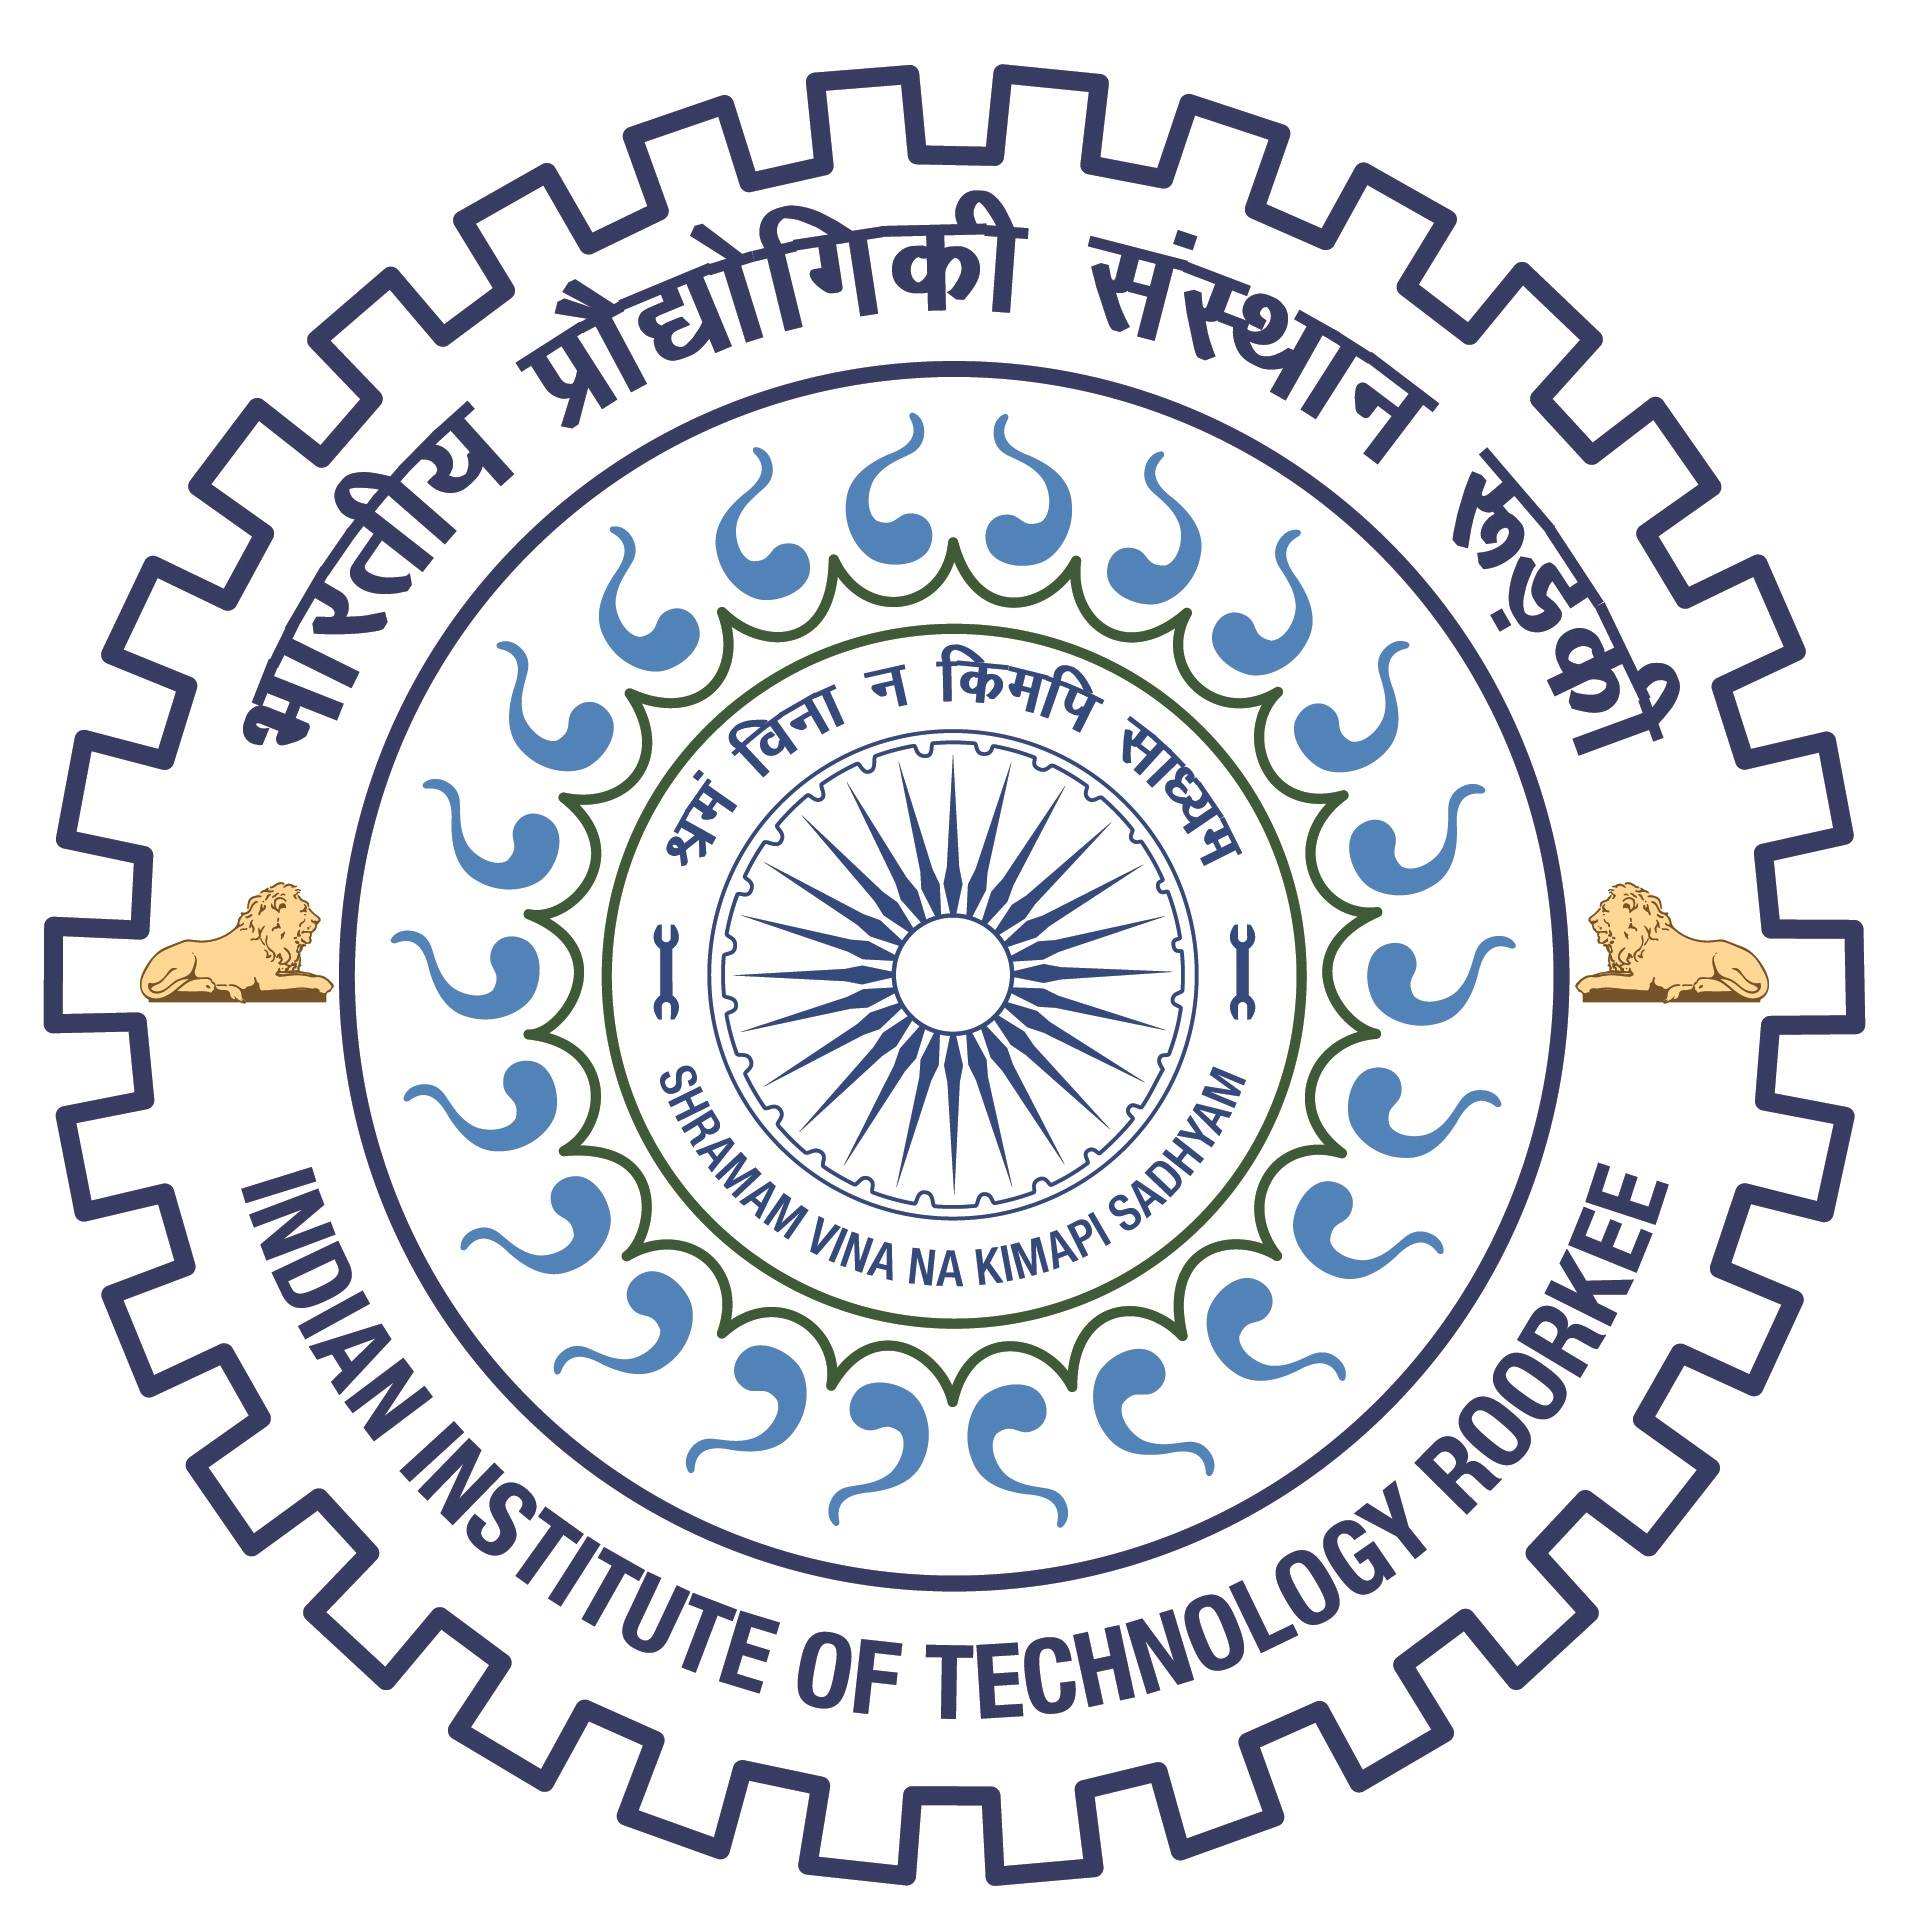 IIT ROORKEE NOTIFICATION 2020 – OPENING FOR VARIOUS ATTENDANT POSTS